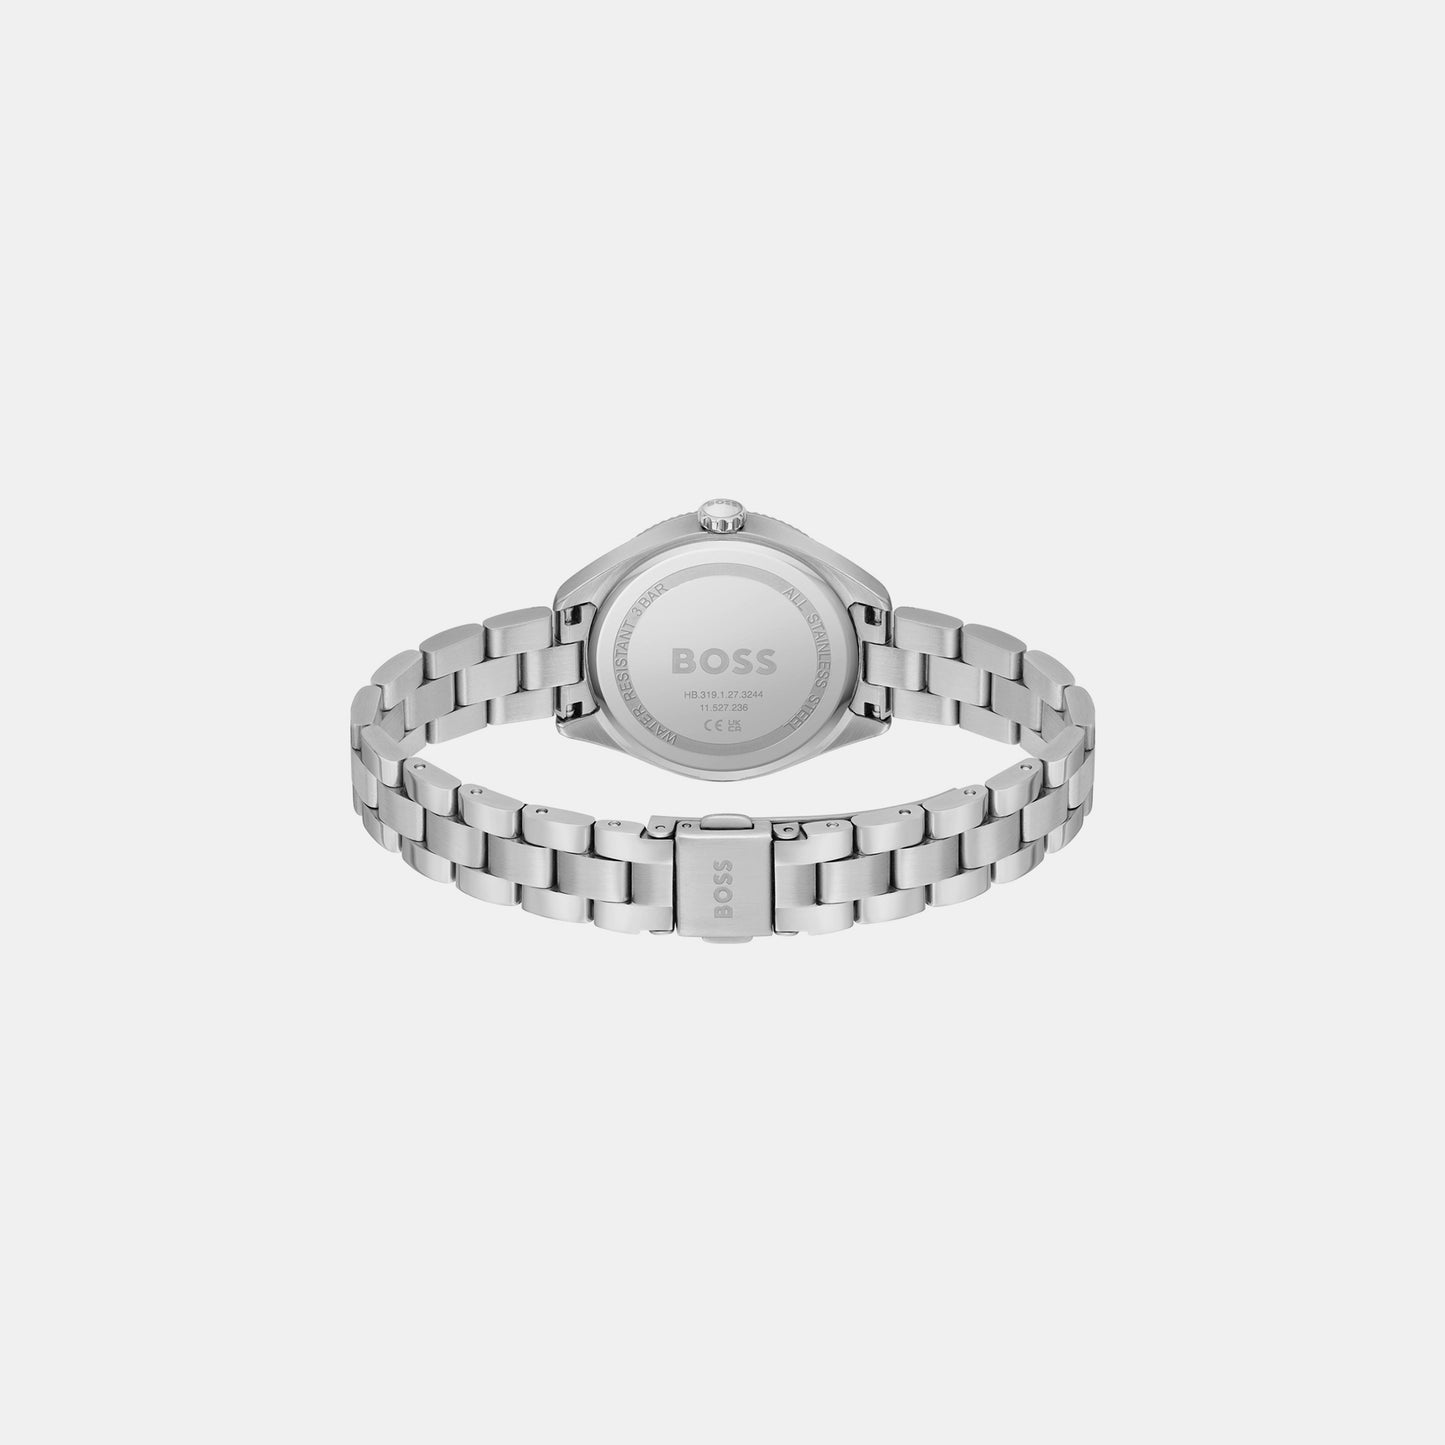 Sage Women's Silver Analog Stainless Steel Watch 1502726